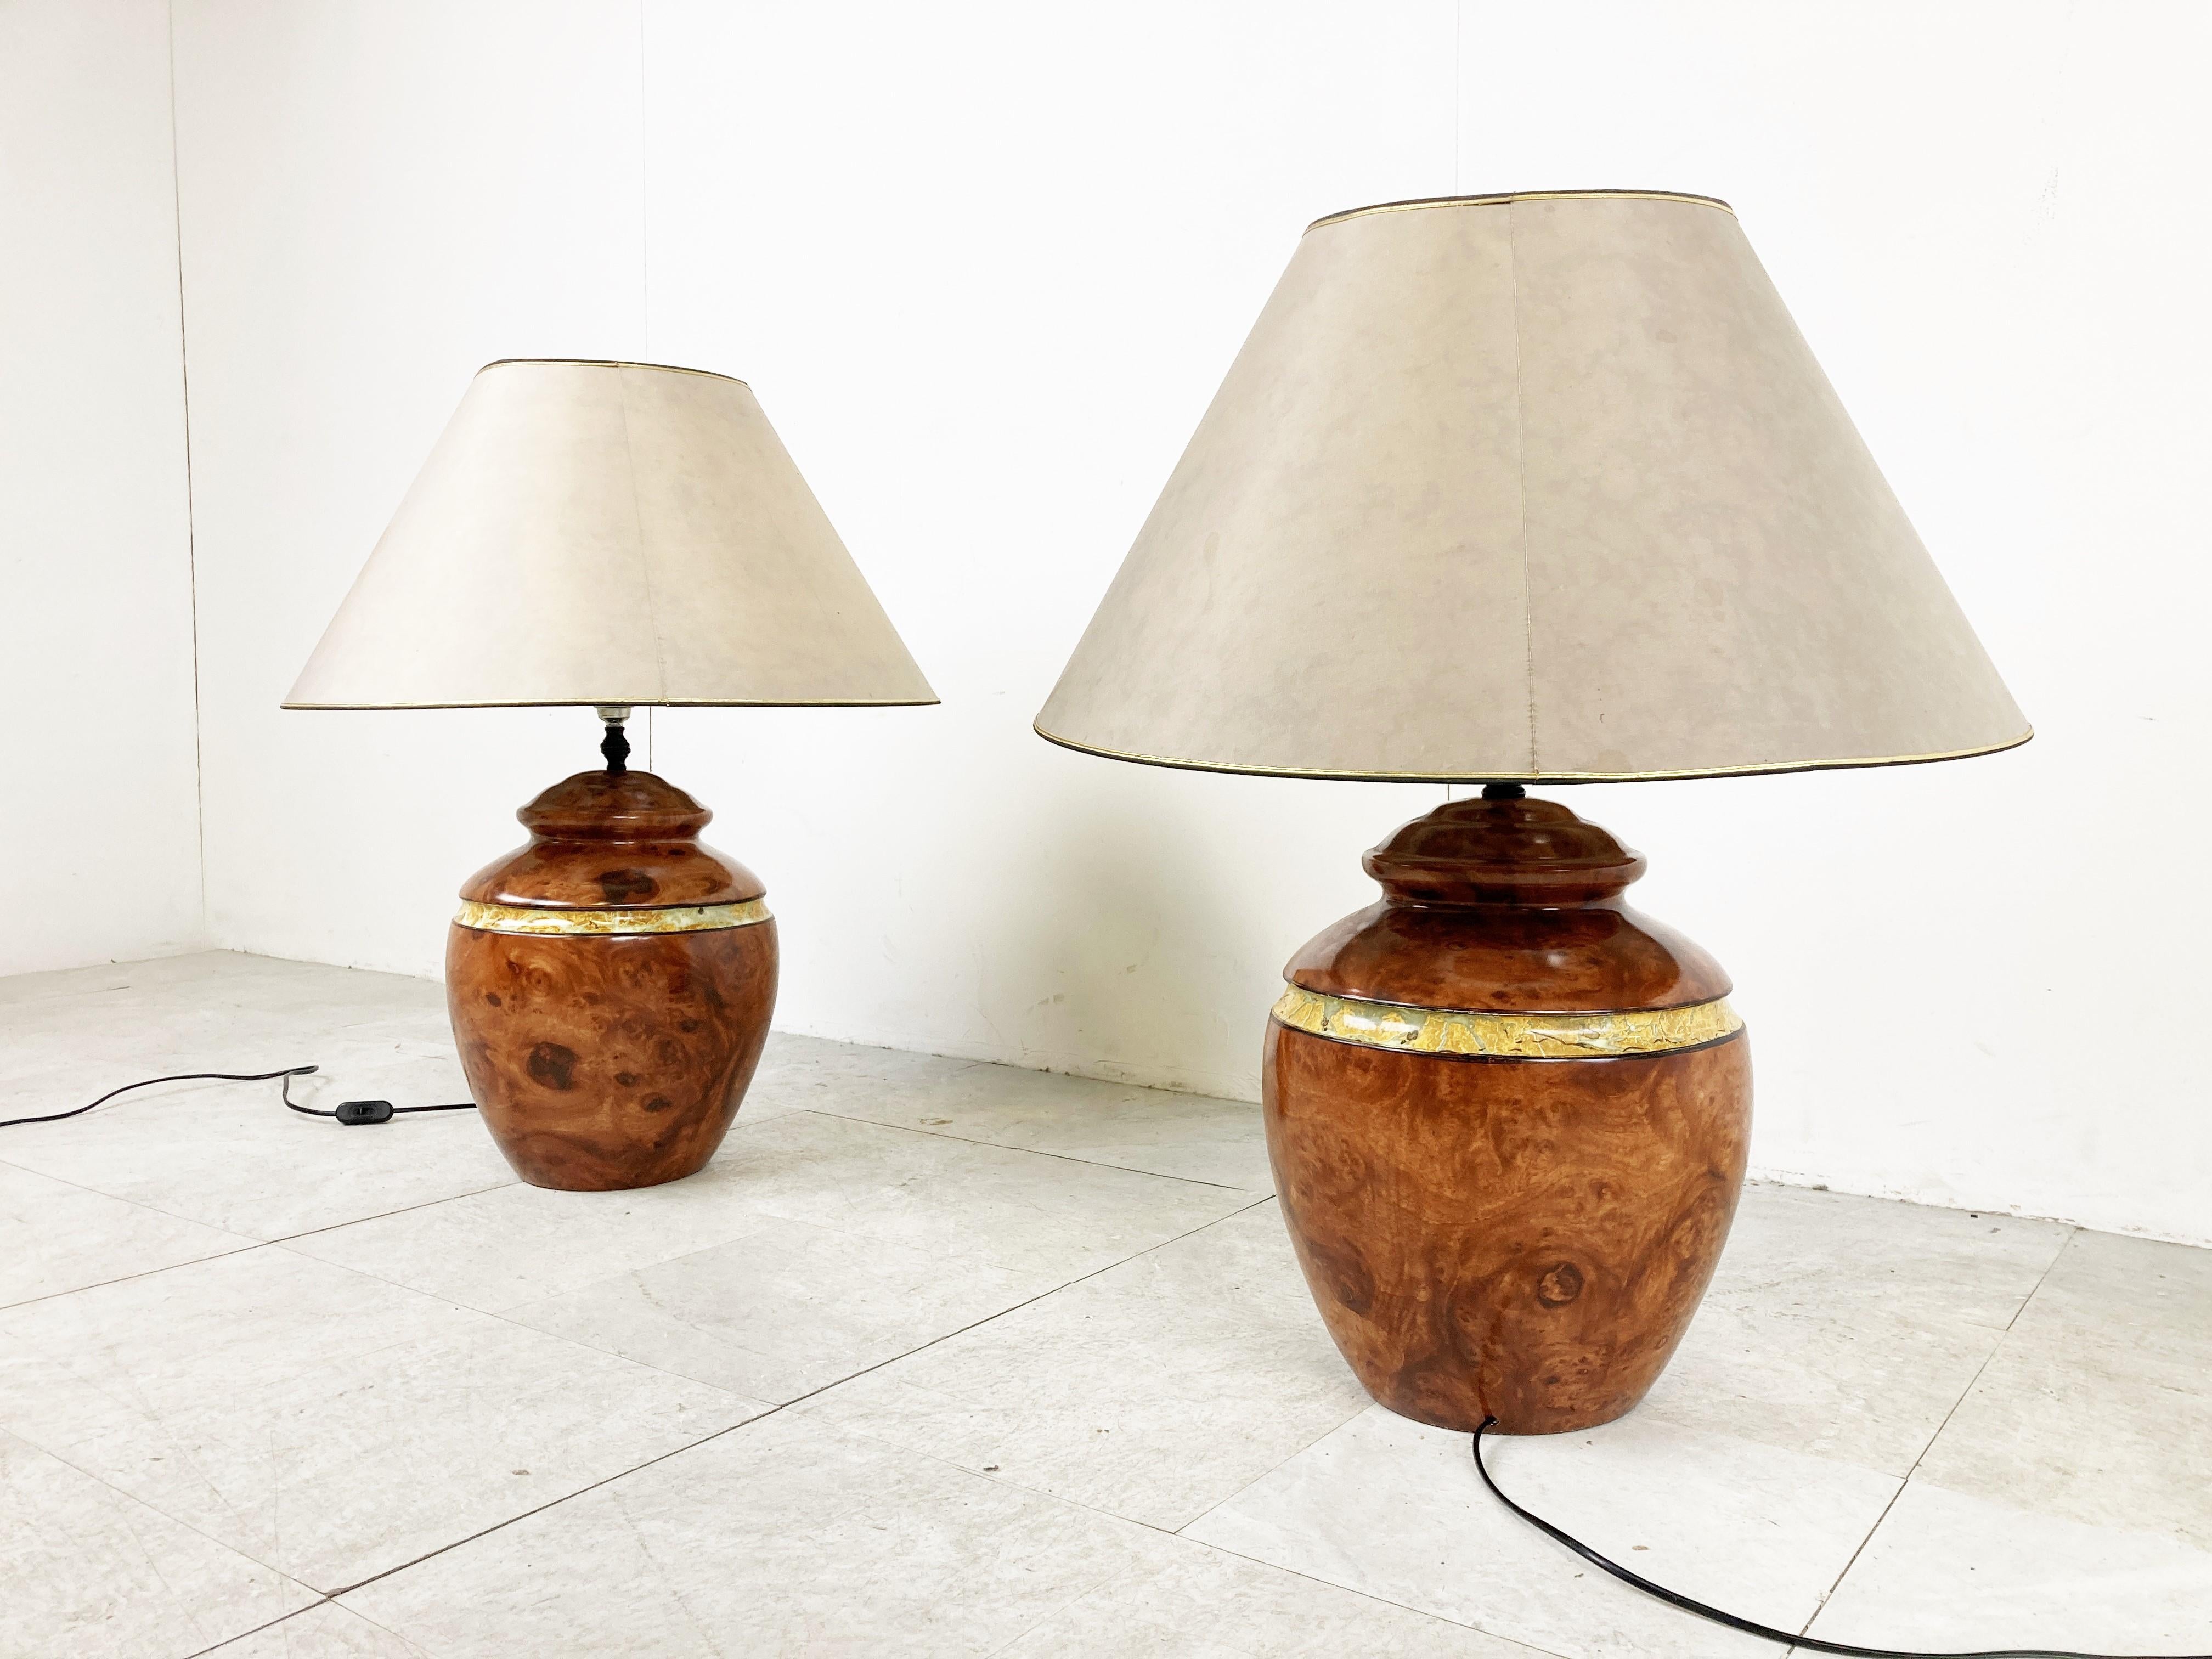 Pair of stunning metal burl wood look table lamps with a very 'chic' look.

The lamps come with their original lamp shades.

Each lamp has one lightpoint (E27 socket)

1980s - France

Dimensions:
Height: 75cm/29.52